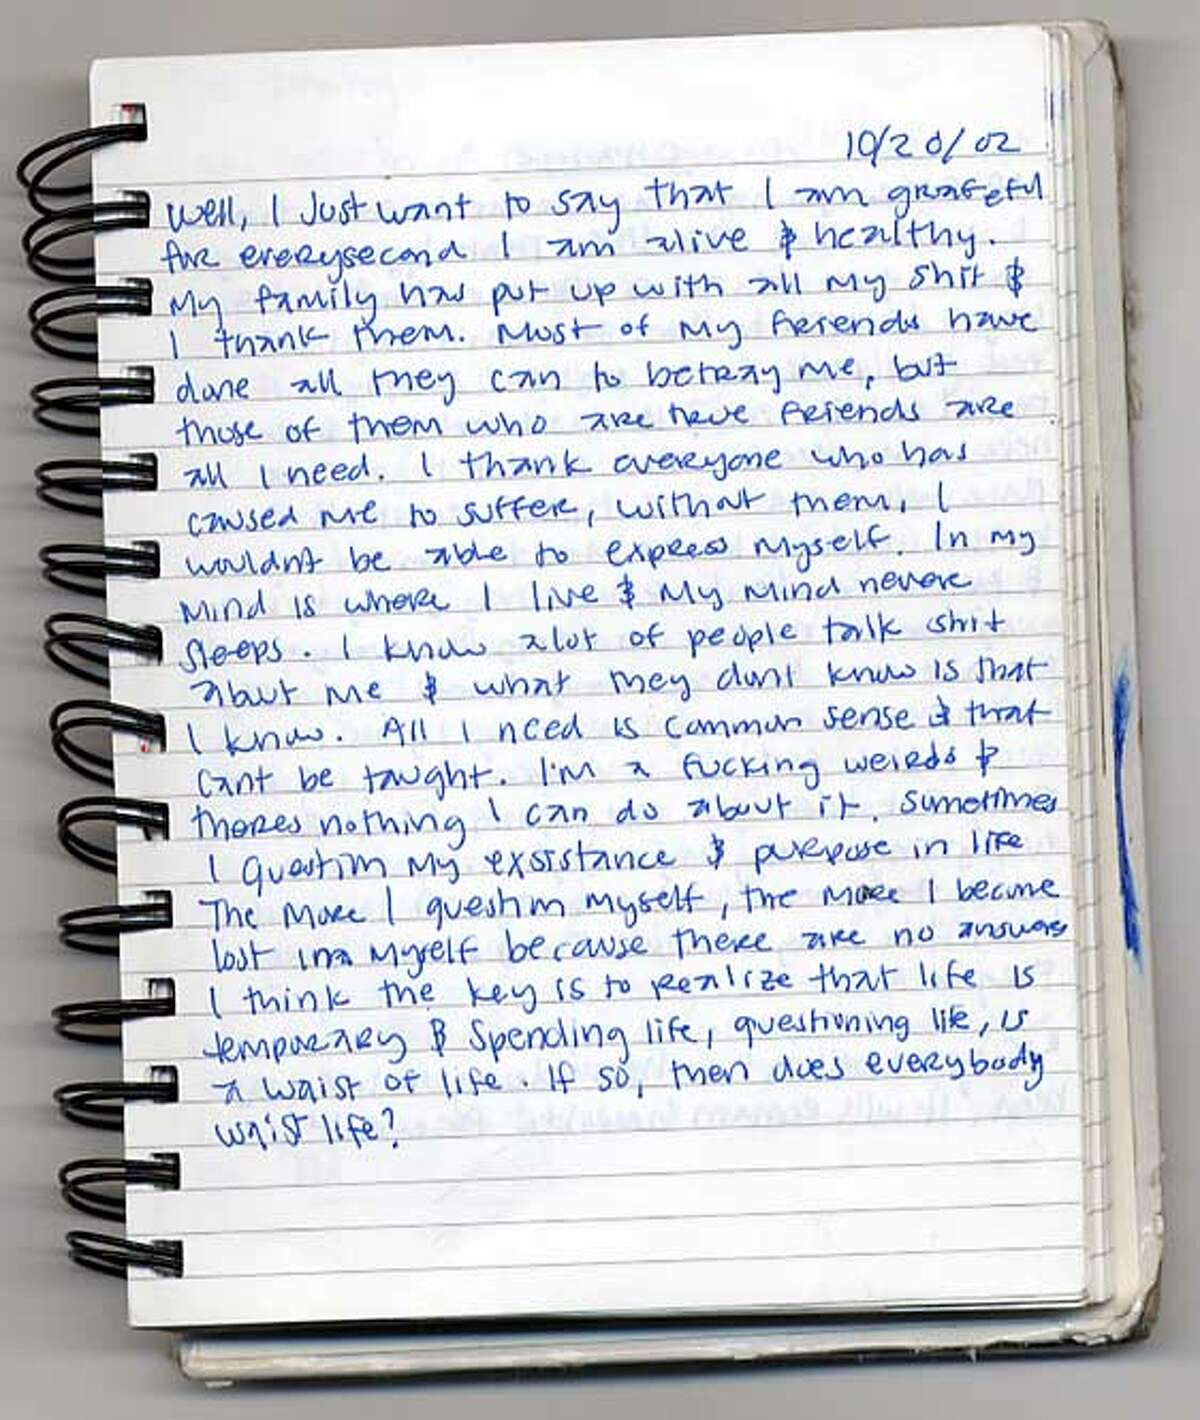 A page from Sam's diary shows how the Walnut Creek teenager struggles with living without drugs